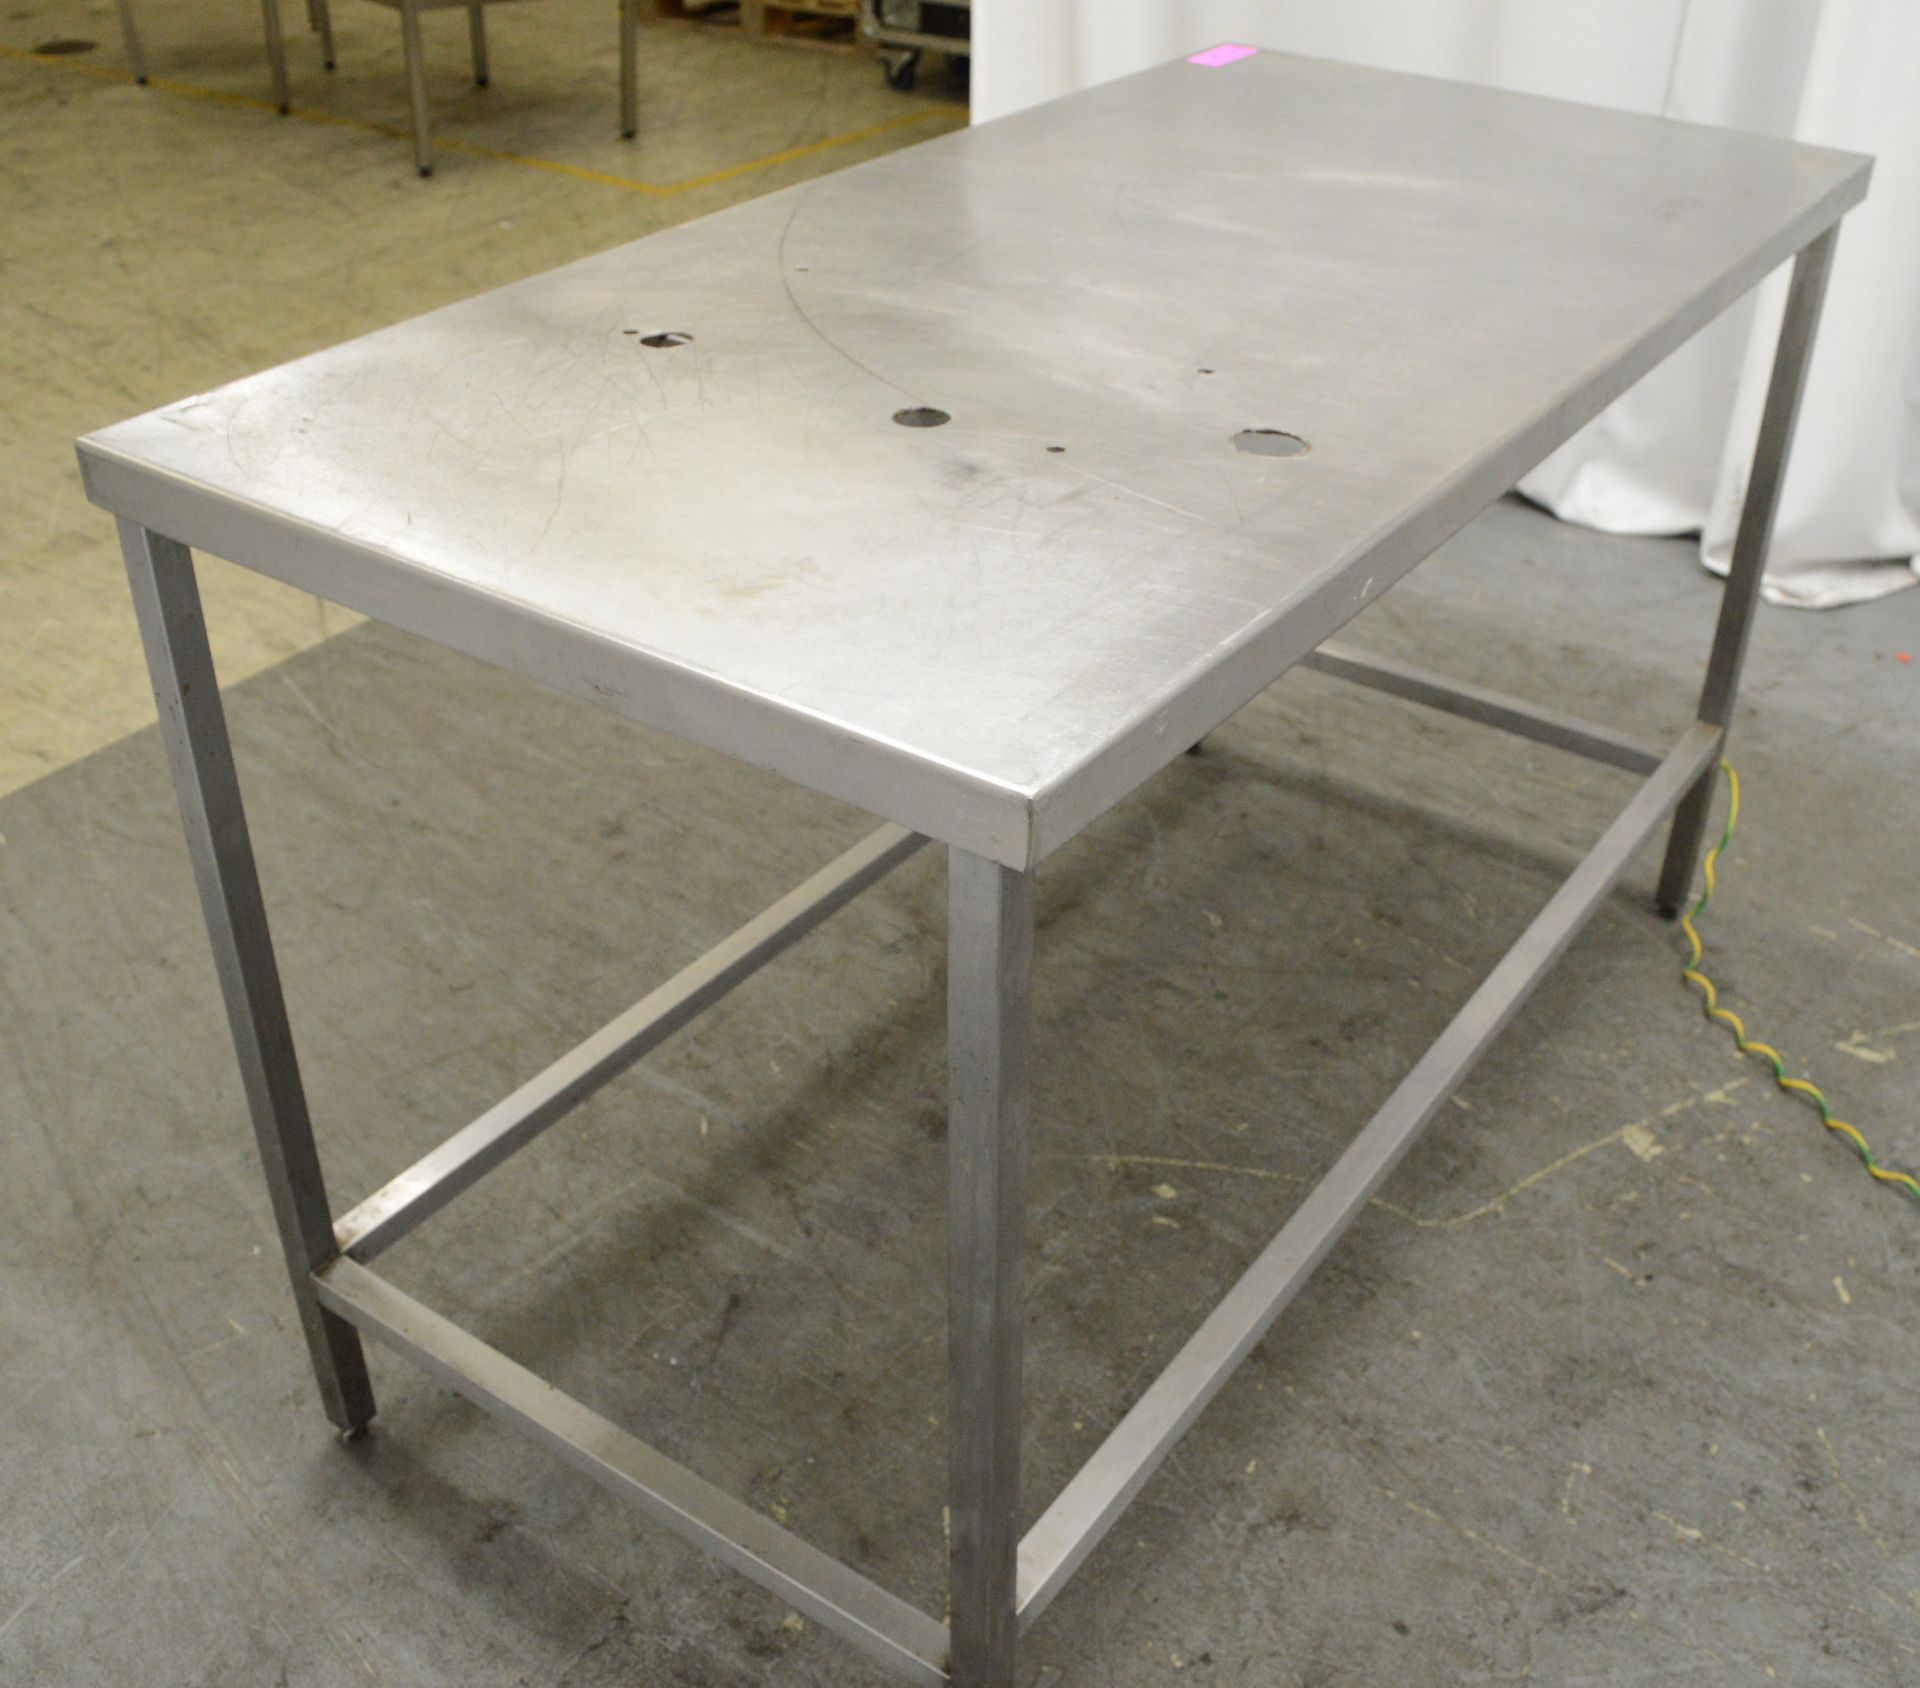 Preparation table 1400mm W x 700mm D x 870mm H - Image 4 of 6